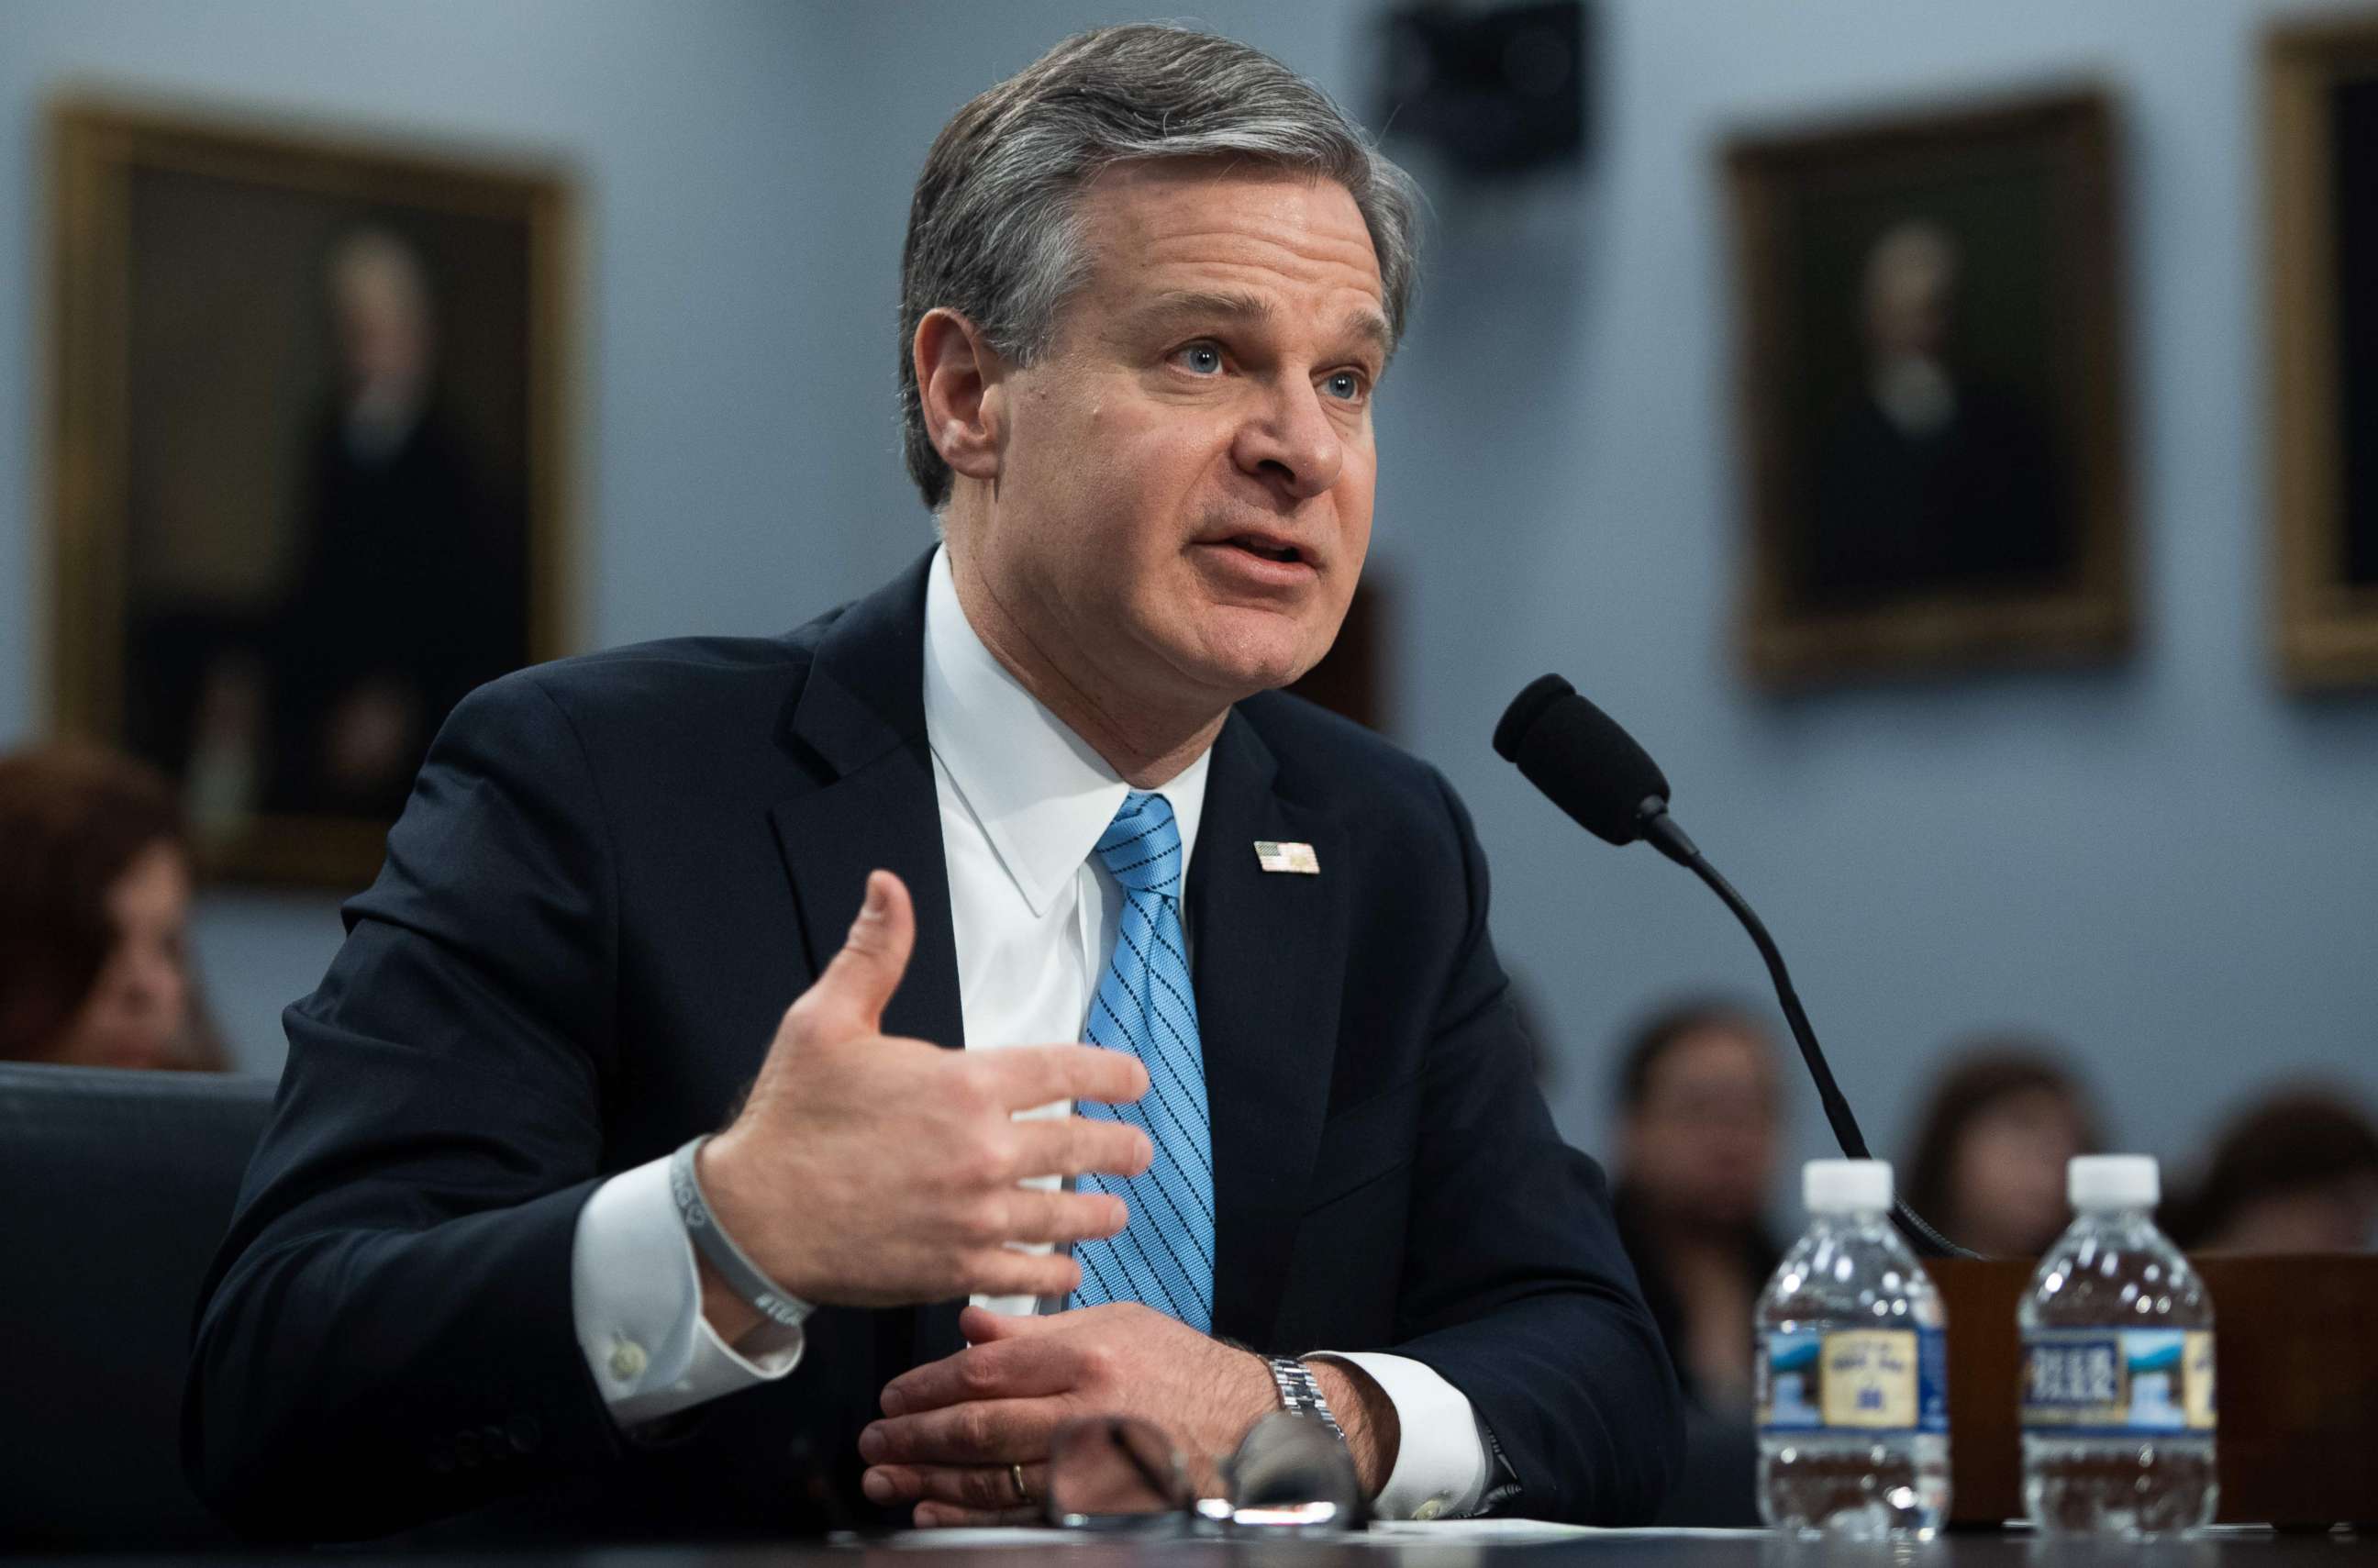 PHOTO: FBI Director Christopher Wray testifies during a U.S. House Commerce, Justice, Science, and Related Agencies Subcommittee hearing on the FBI's Budget Request for Fiscal Year 2020, on Capitol Hill in Washington, April 4, 2019.